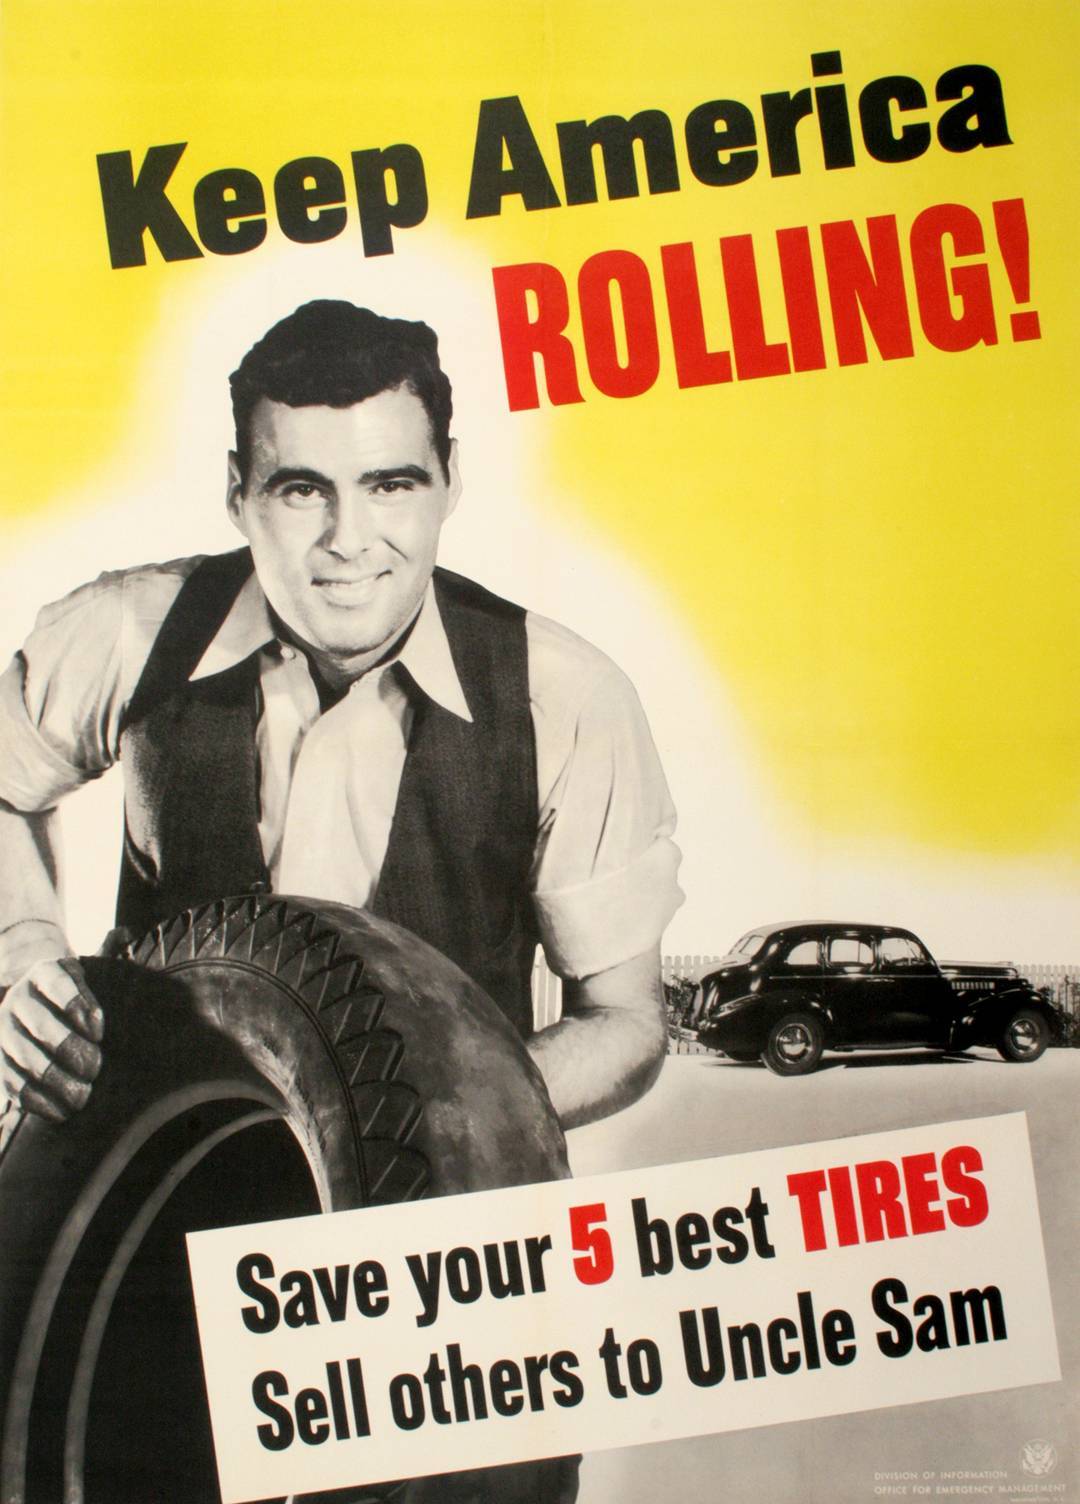 Keep America Rolling 1942 Original WWII Poster by Rutlidge Man with Tire